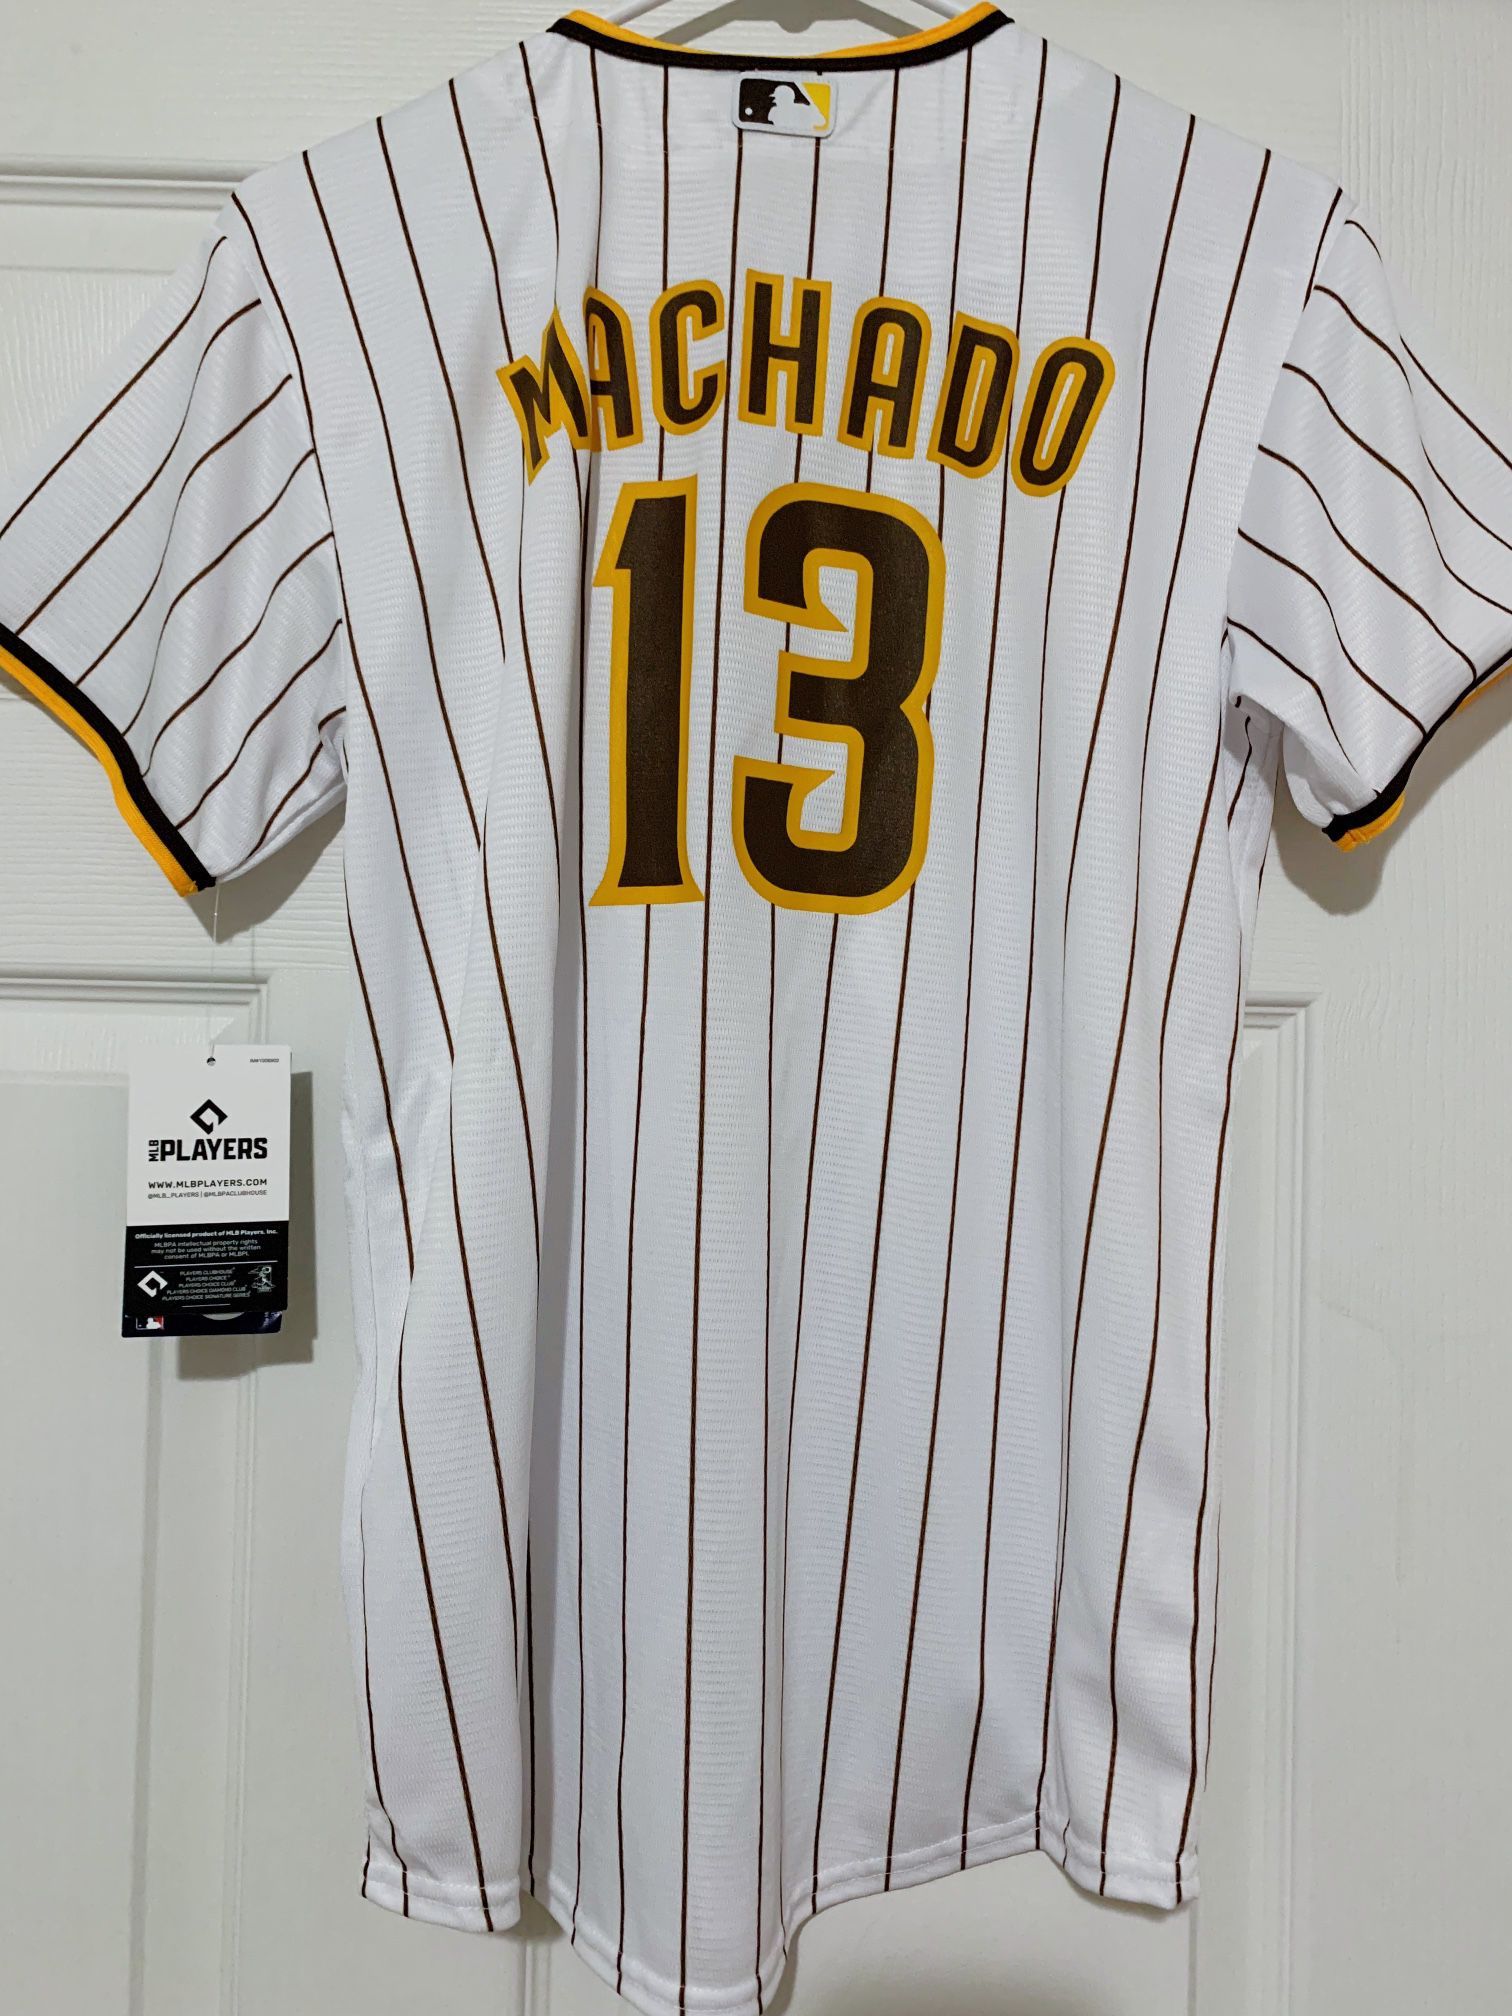 New San Diego Padres Youth Manny Machado #13 Home Jersey for Sale in San  Diego, CA - OfferUp